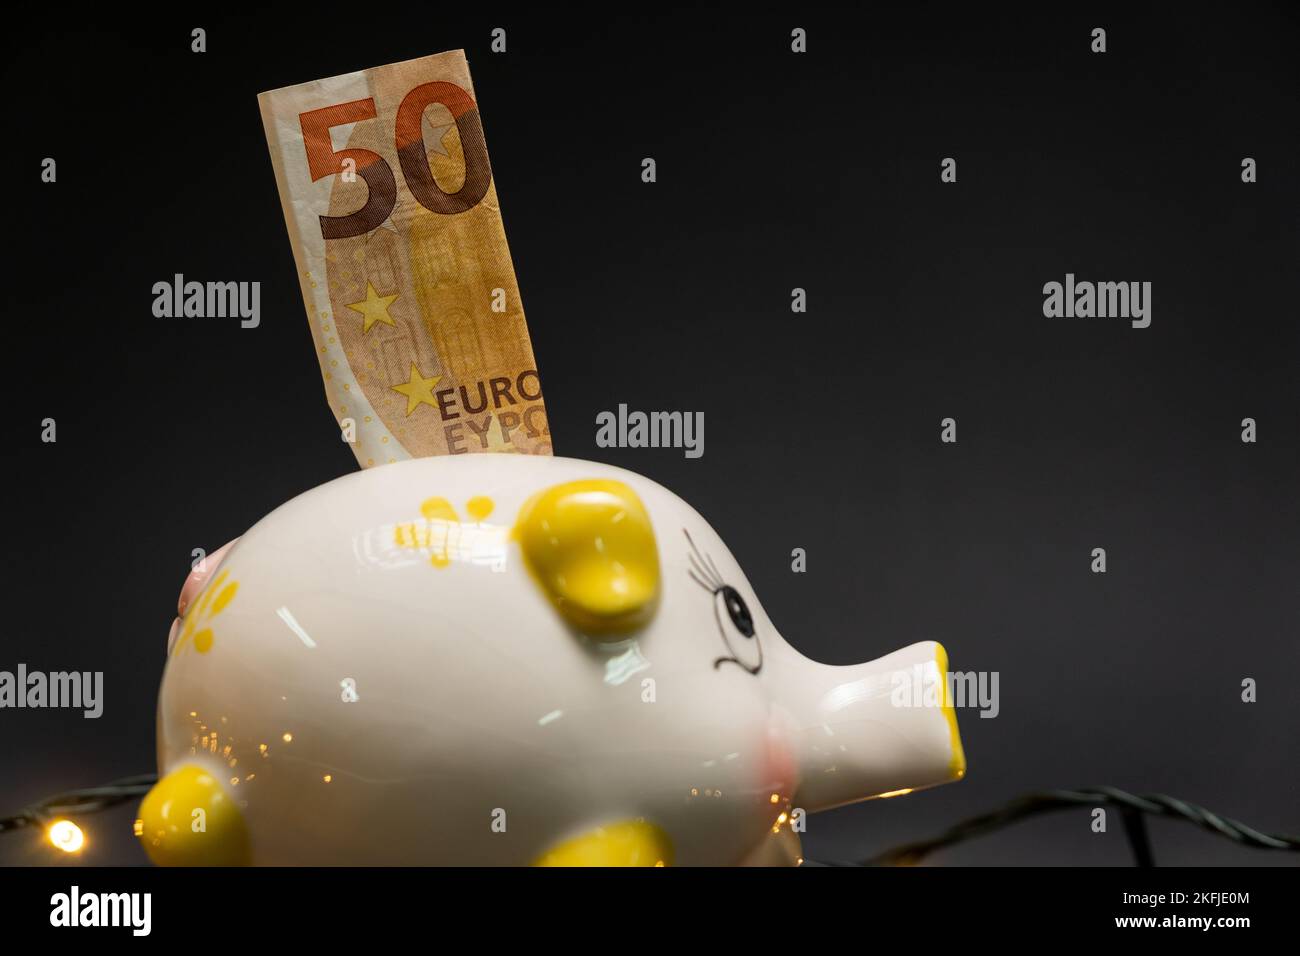 Fifty euro banknote in a piggy bank, on a dark background. Side view. Concept of saving money. copy space. Stock Photo